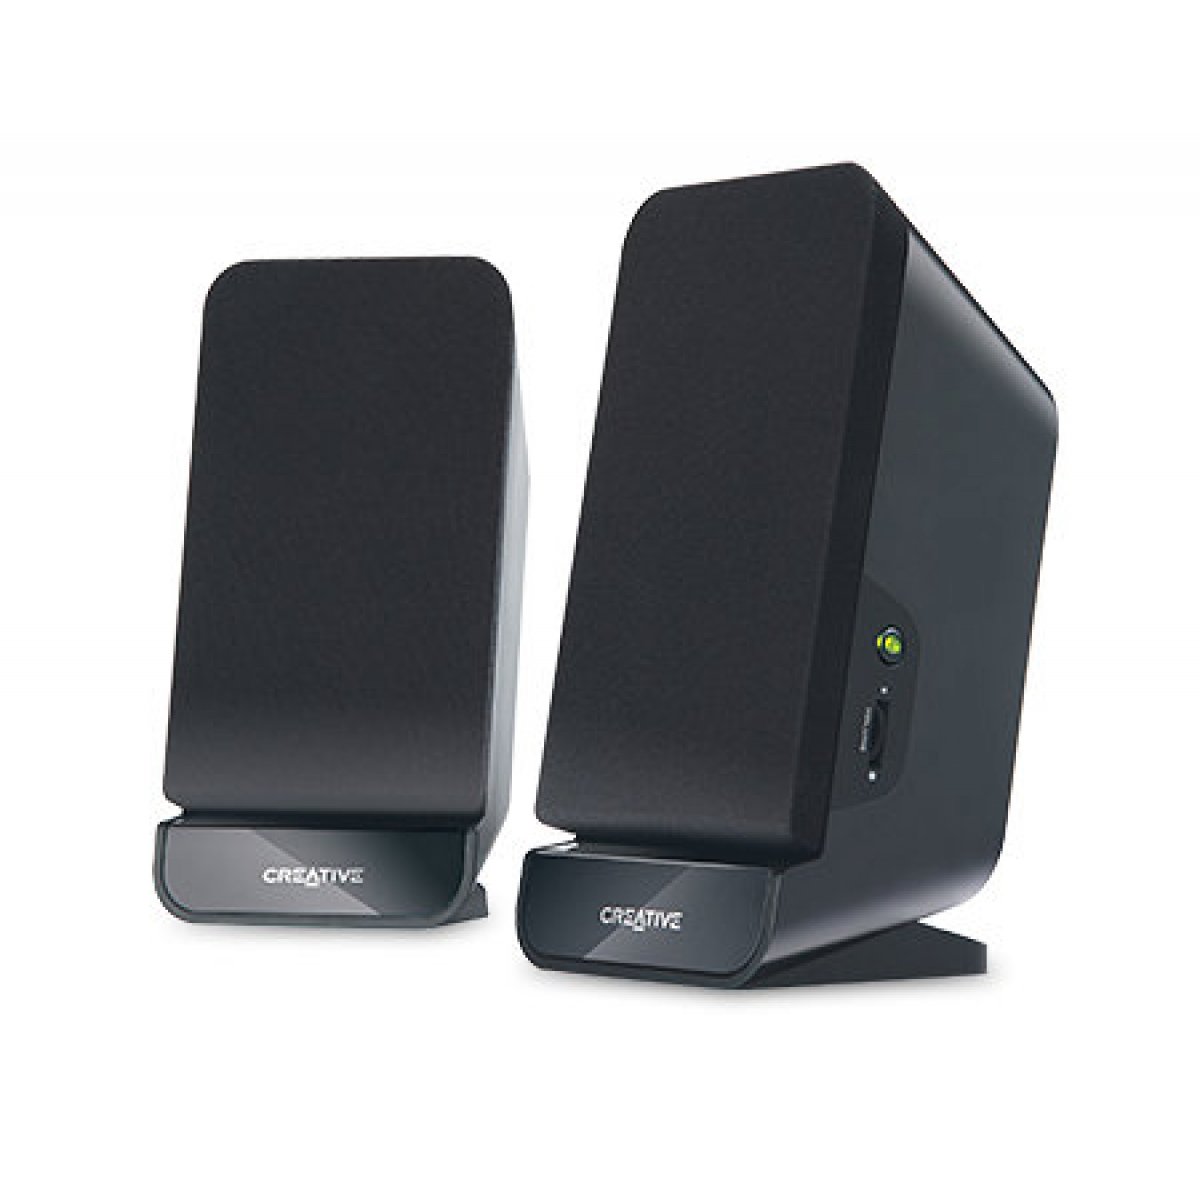 ALTAVOCES MULTIMEDIA CREATIVE LABS A60 2.0 4W RMS